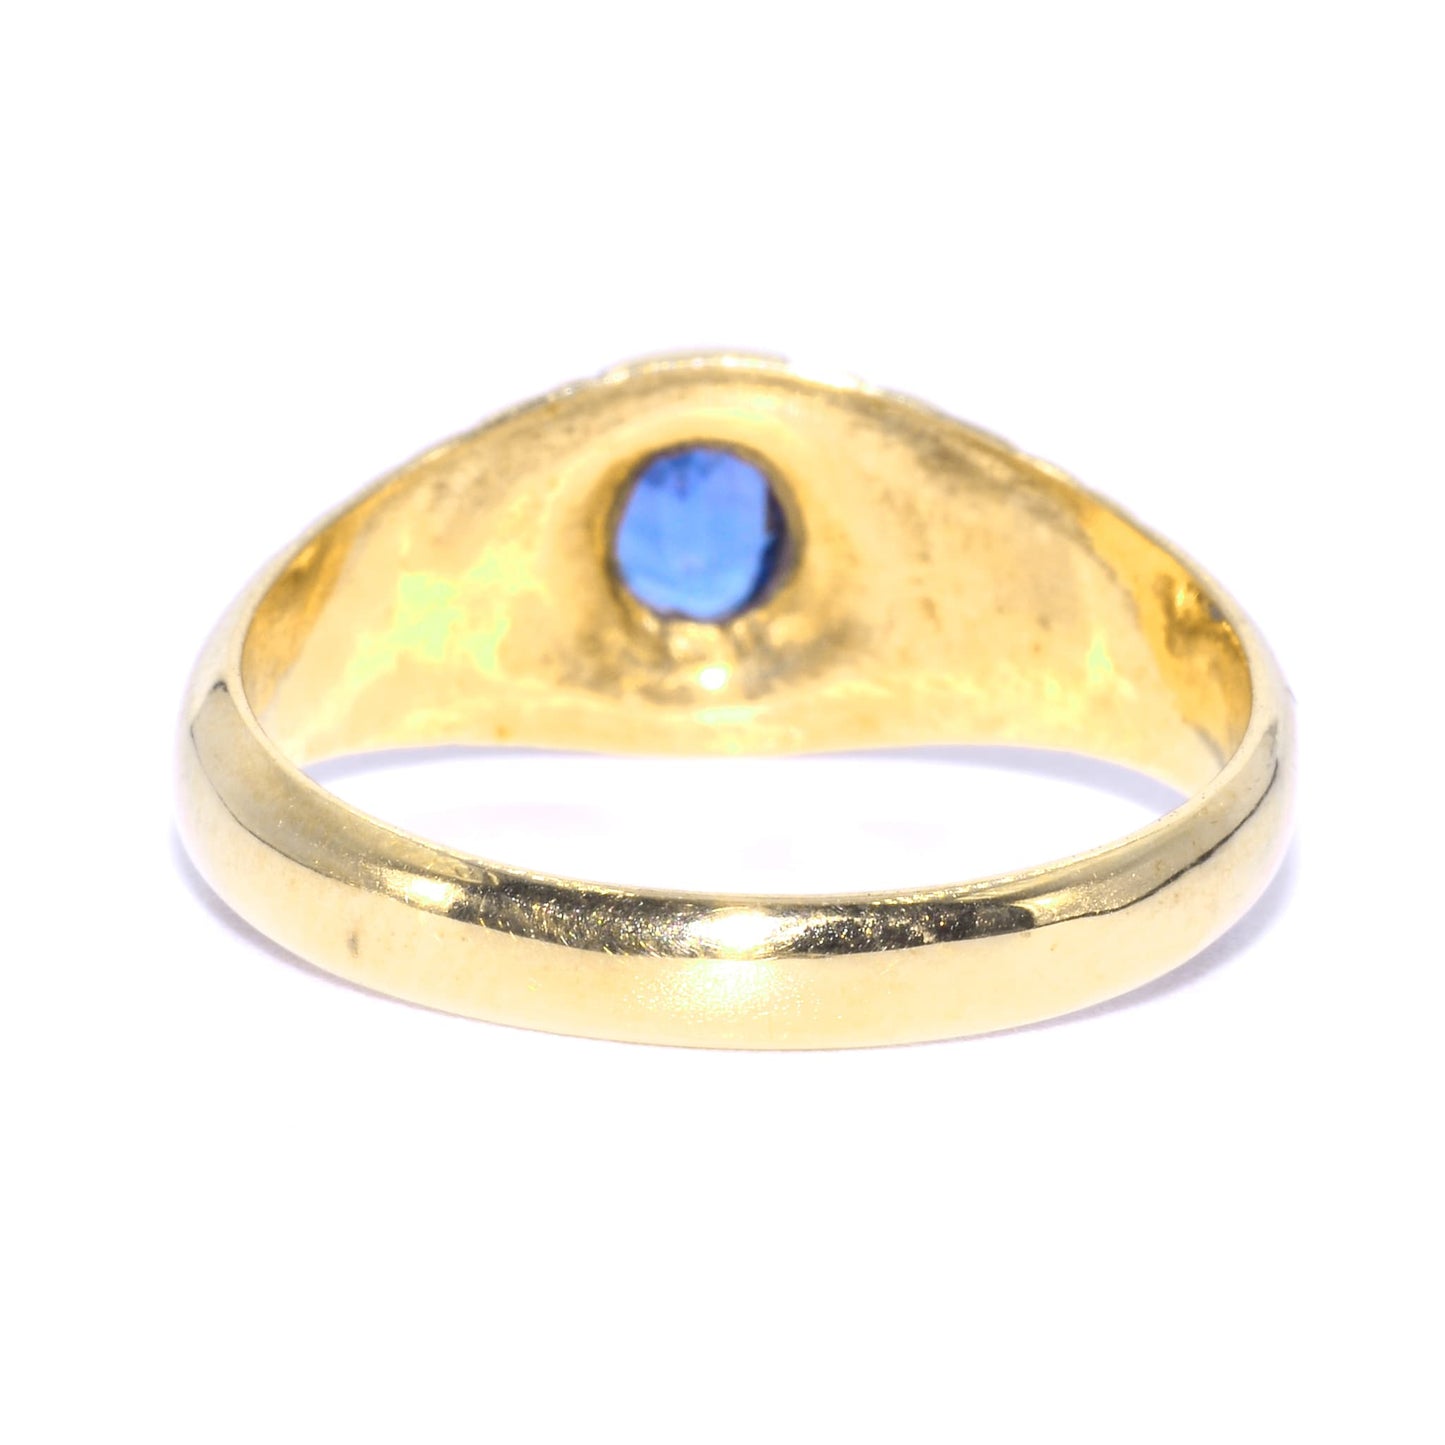 Blue sapphire ring for him